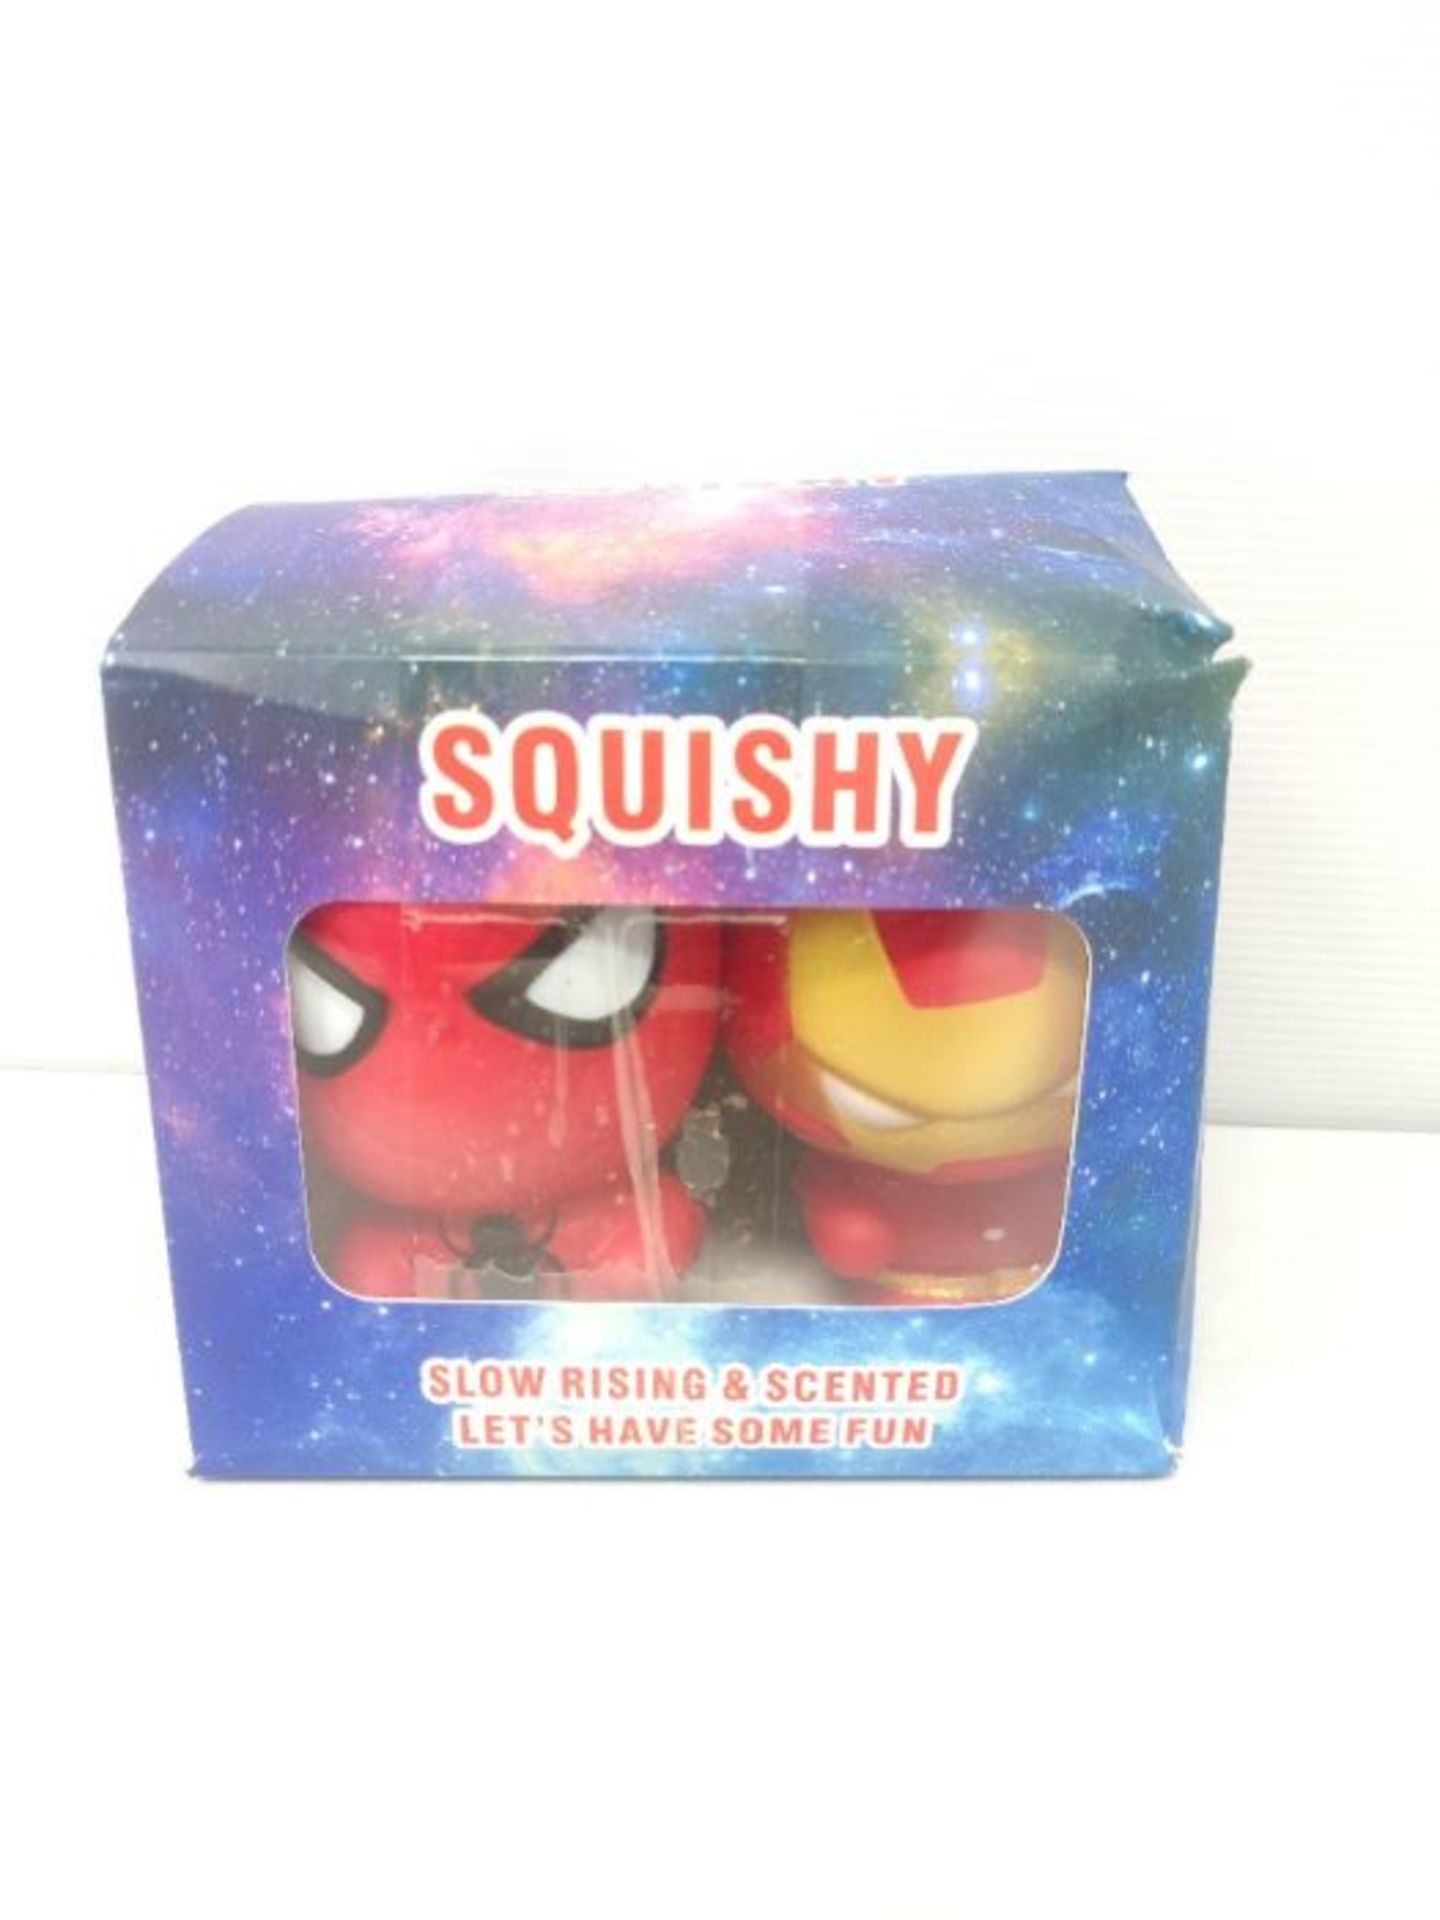 BKT Perform Marvel Superhero Toy Squishies Gift Film Characters Squishy 4 Pack Large S - Image 2 of 3